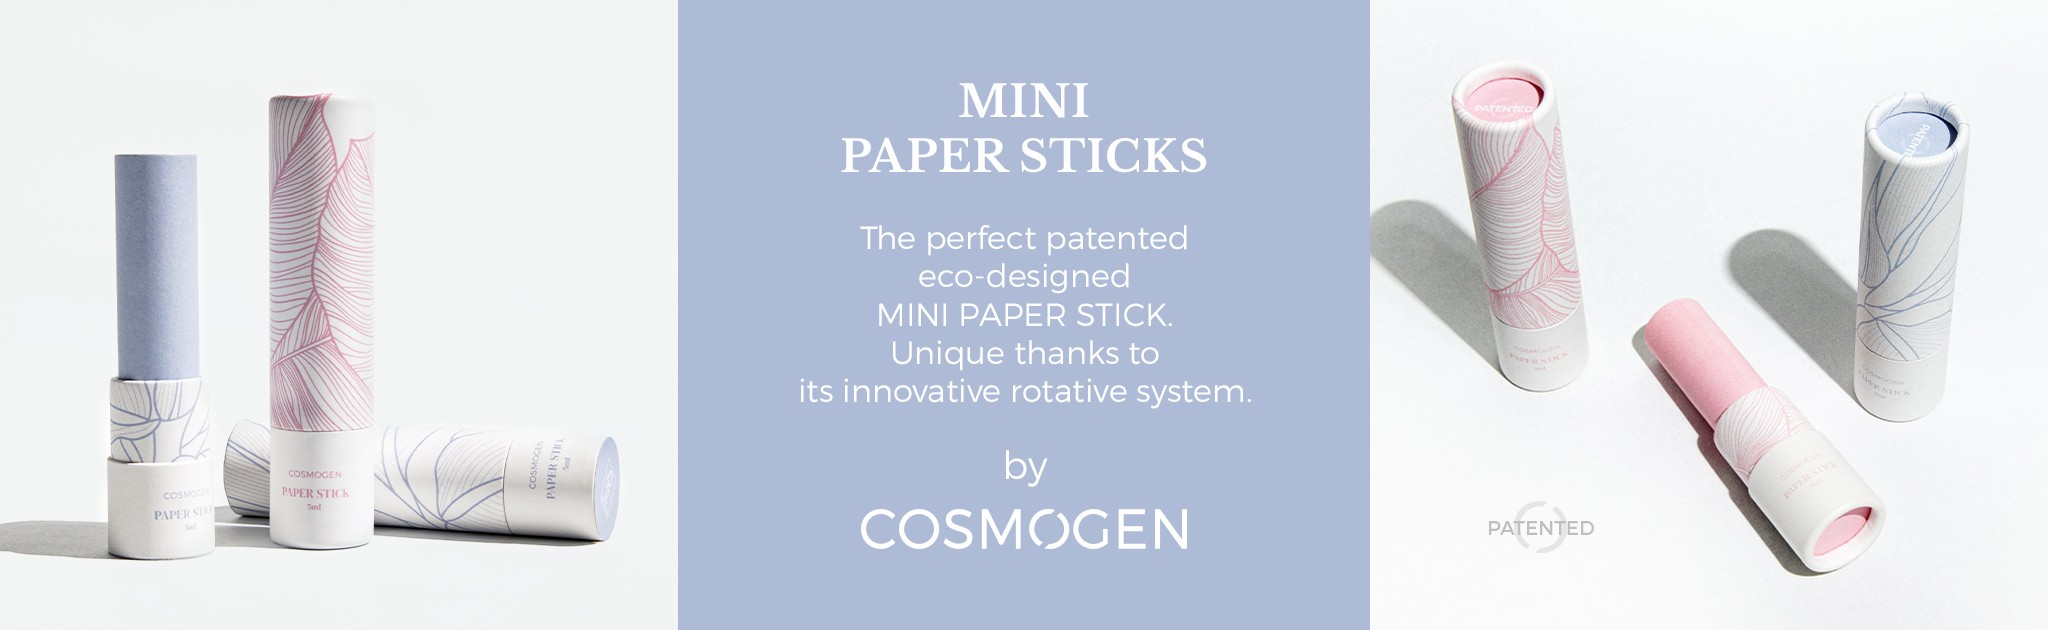 https://www.cosmogen.fr/paper-stick-5ml.html?search_query=paper+stick&results=3